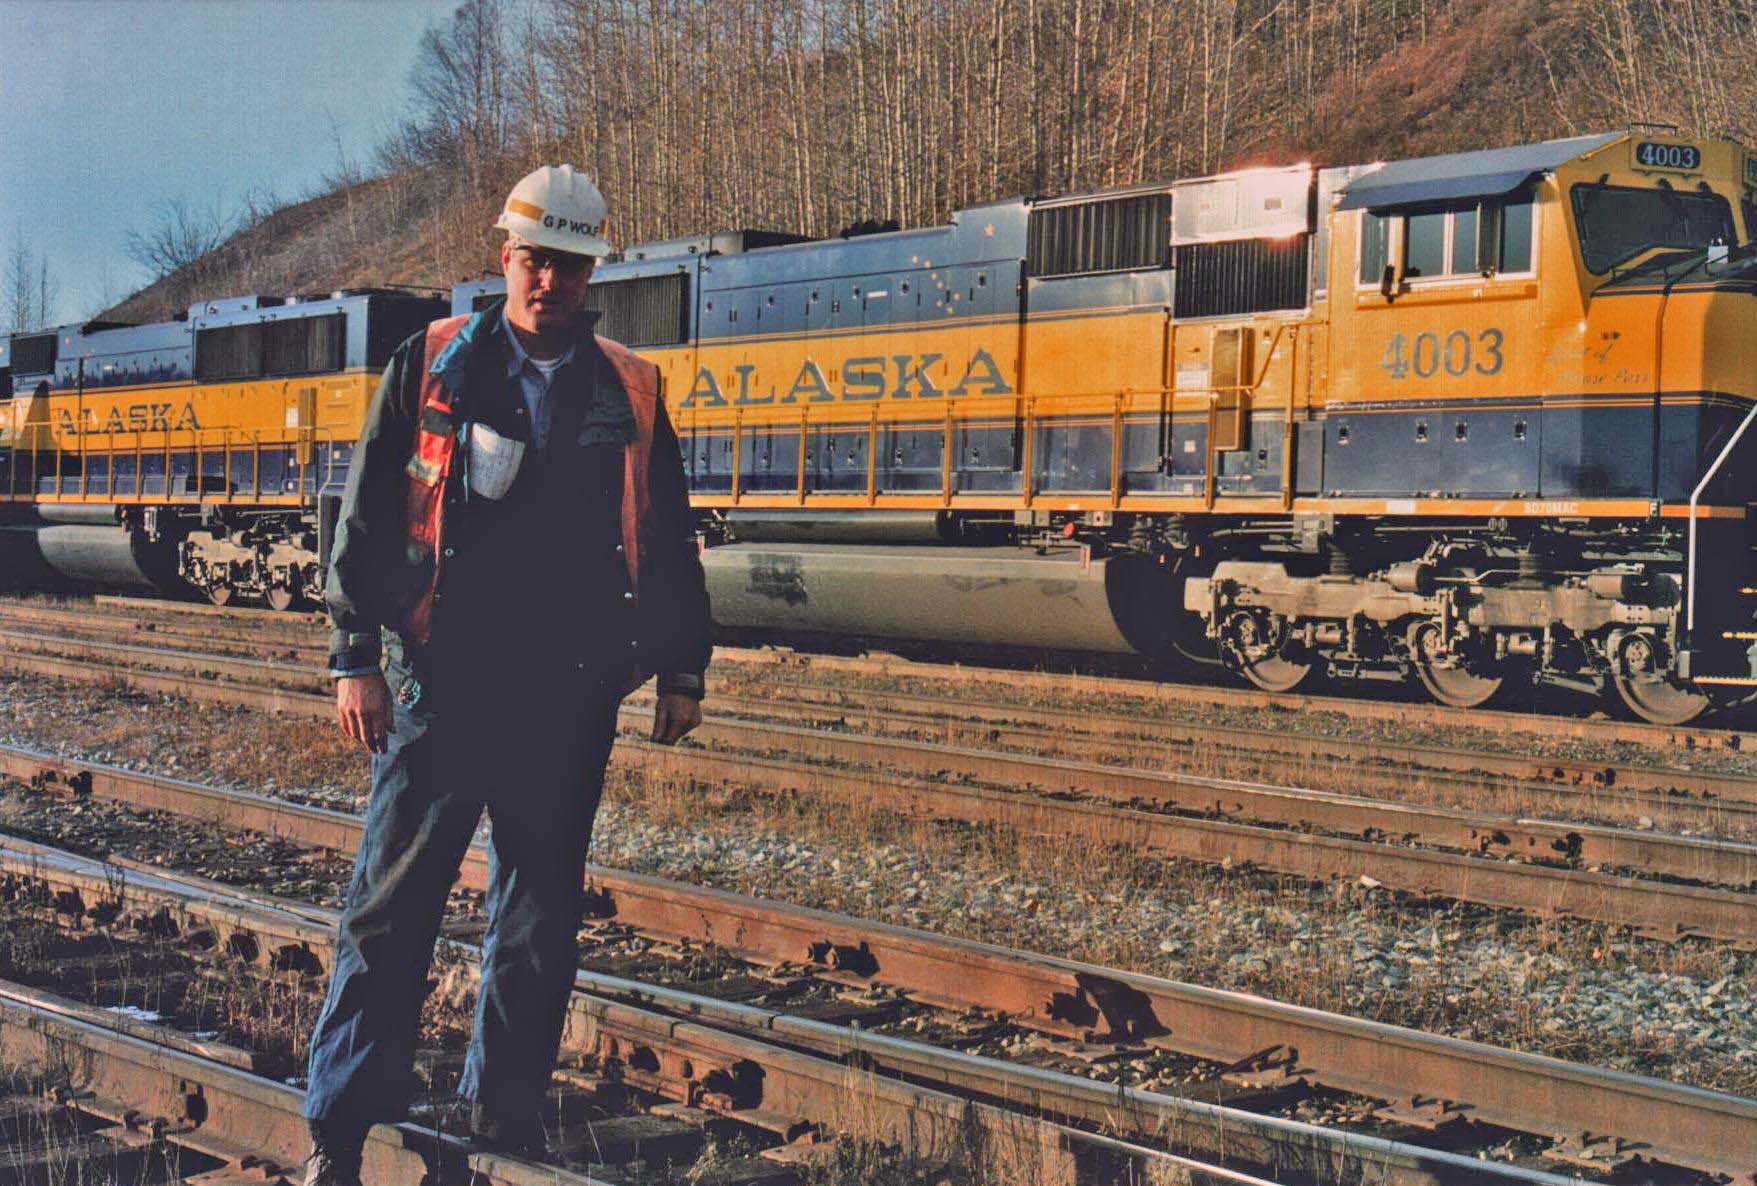 Over the course of his career, Gary Wolf, BSEE ’71, has trained more than 7,000 railway professionals on the art of accident prevention and investigation—work that continues today. In February, he was training the Alaska Railroad on derailment investigation. Photo courtesy of Gary Wolf